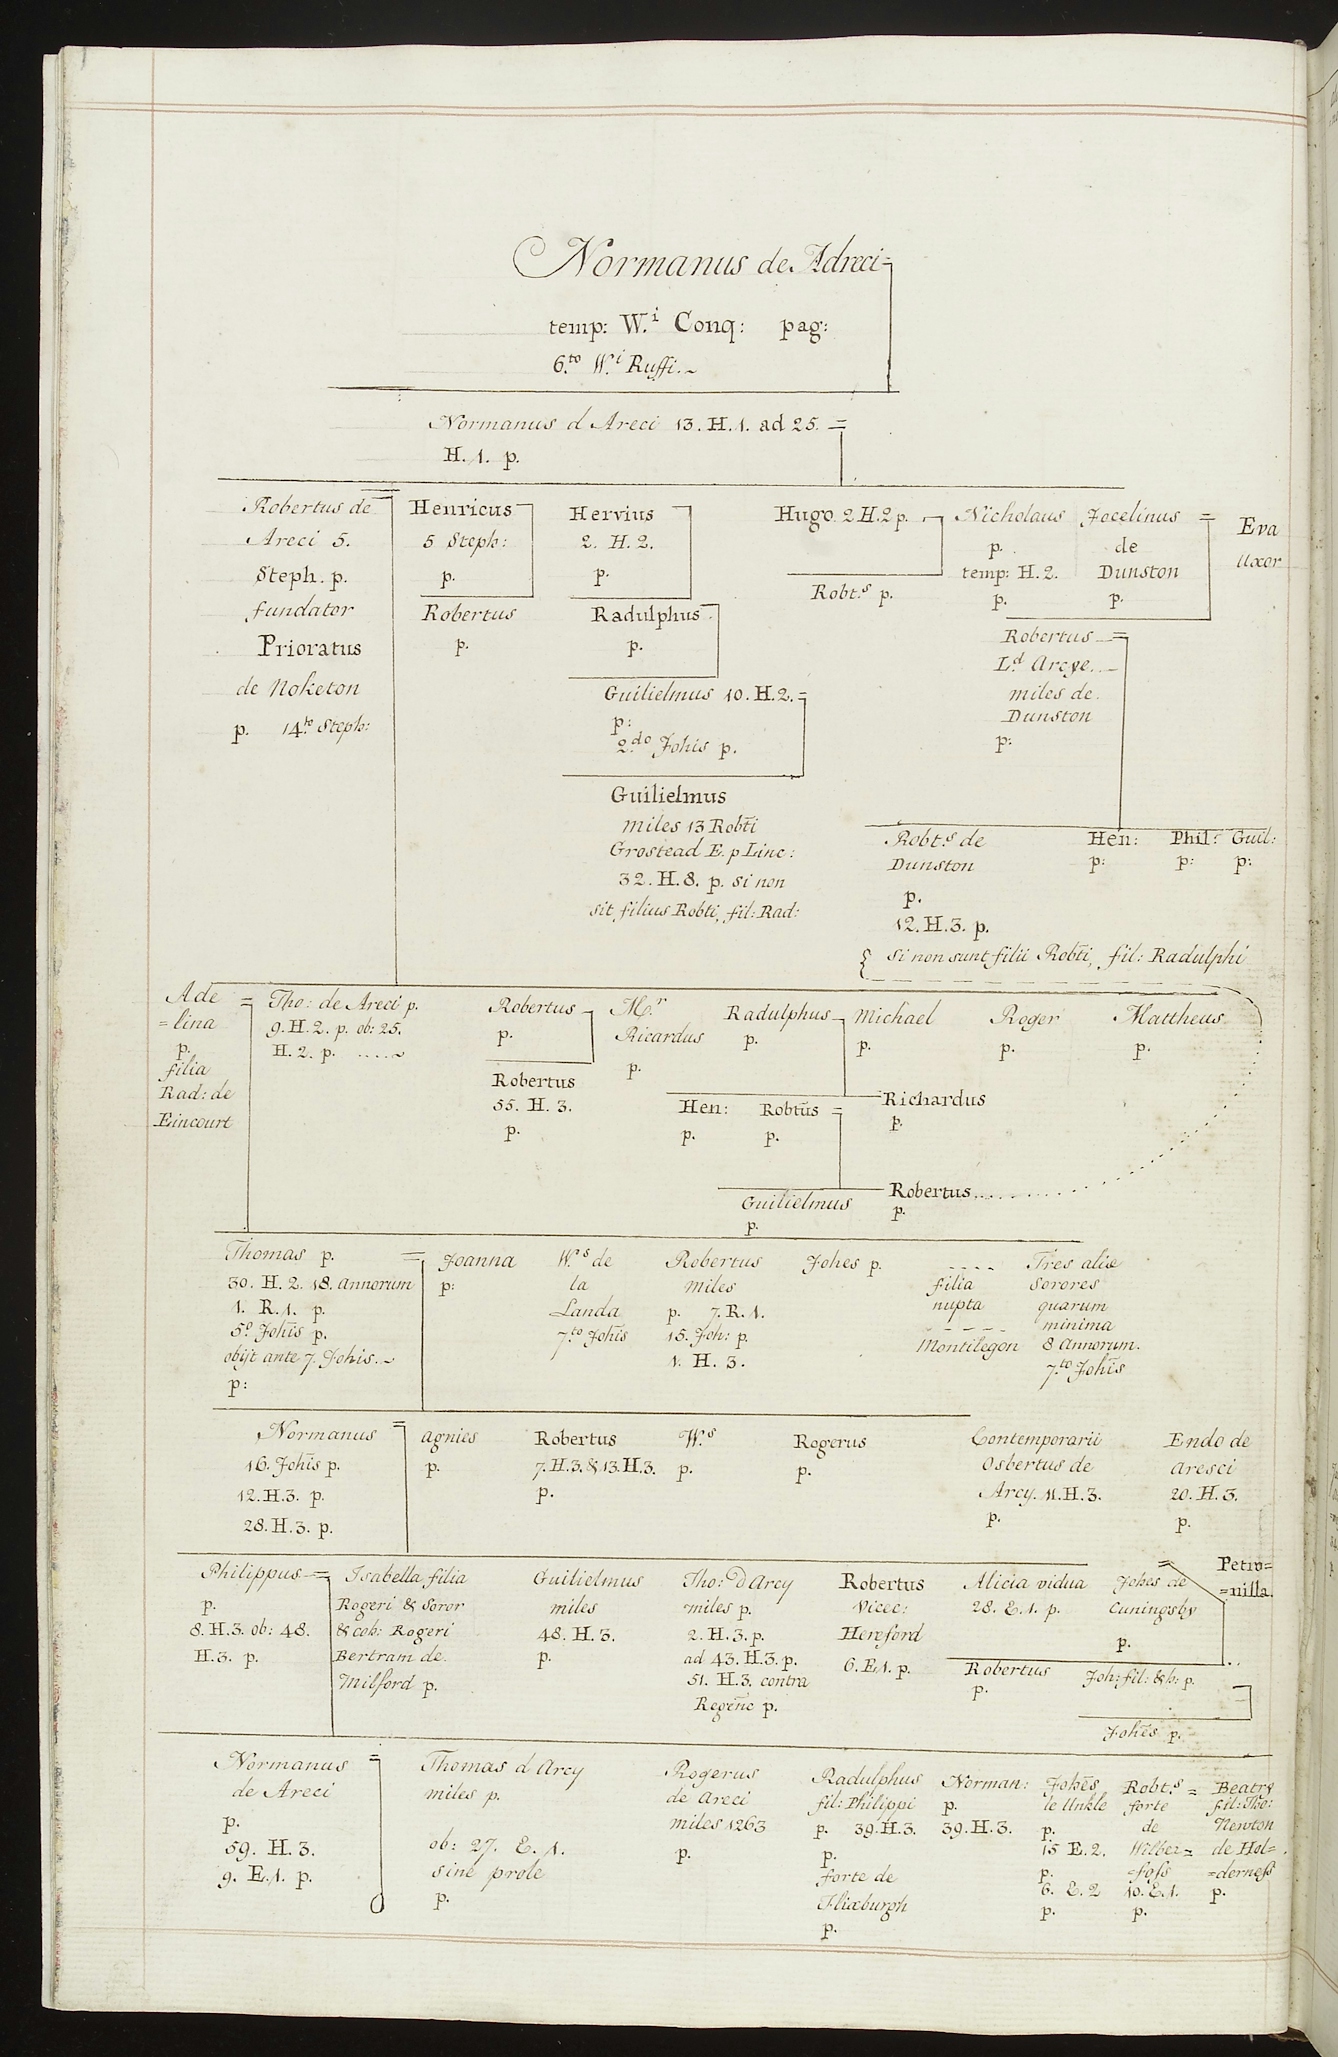 Black and white family tree with the "root" of the tree being Normanus de Adreci at the top and the families of D'Arcie, Conyers, Mennill and Melton recorded and linked.